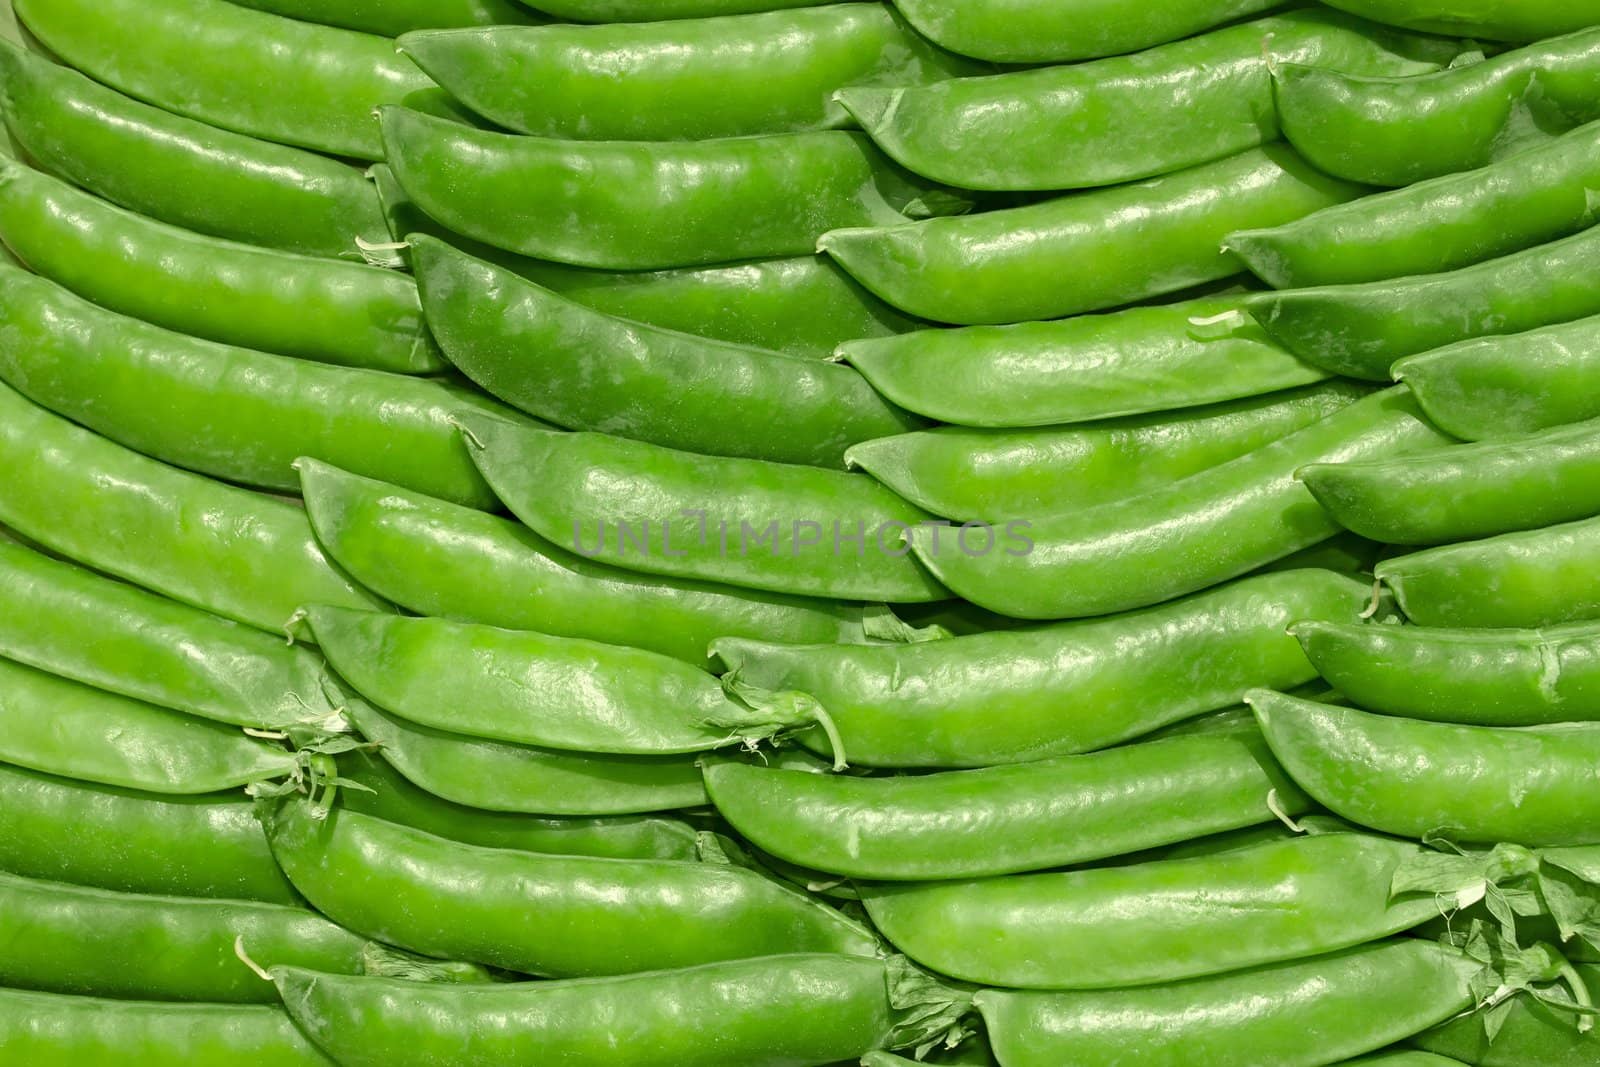 Young green pea pods by qiiip